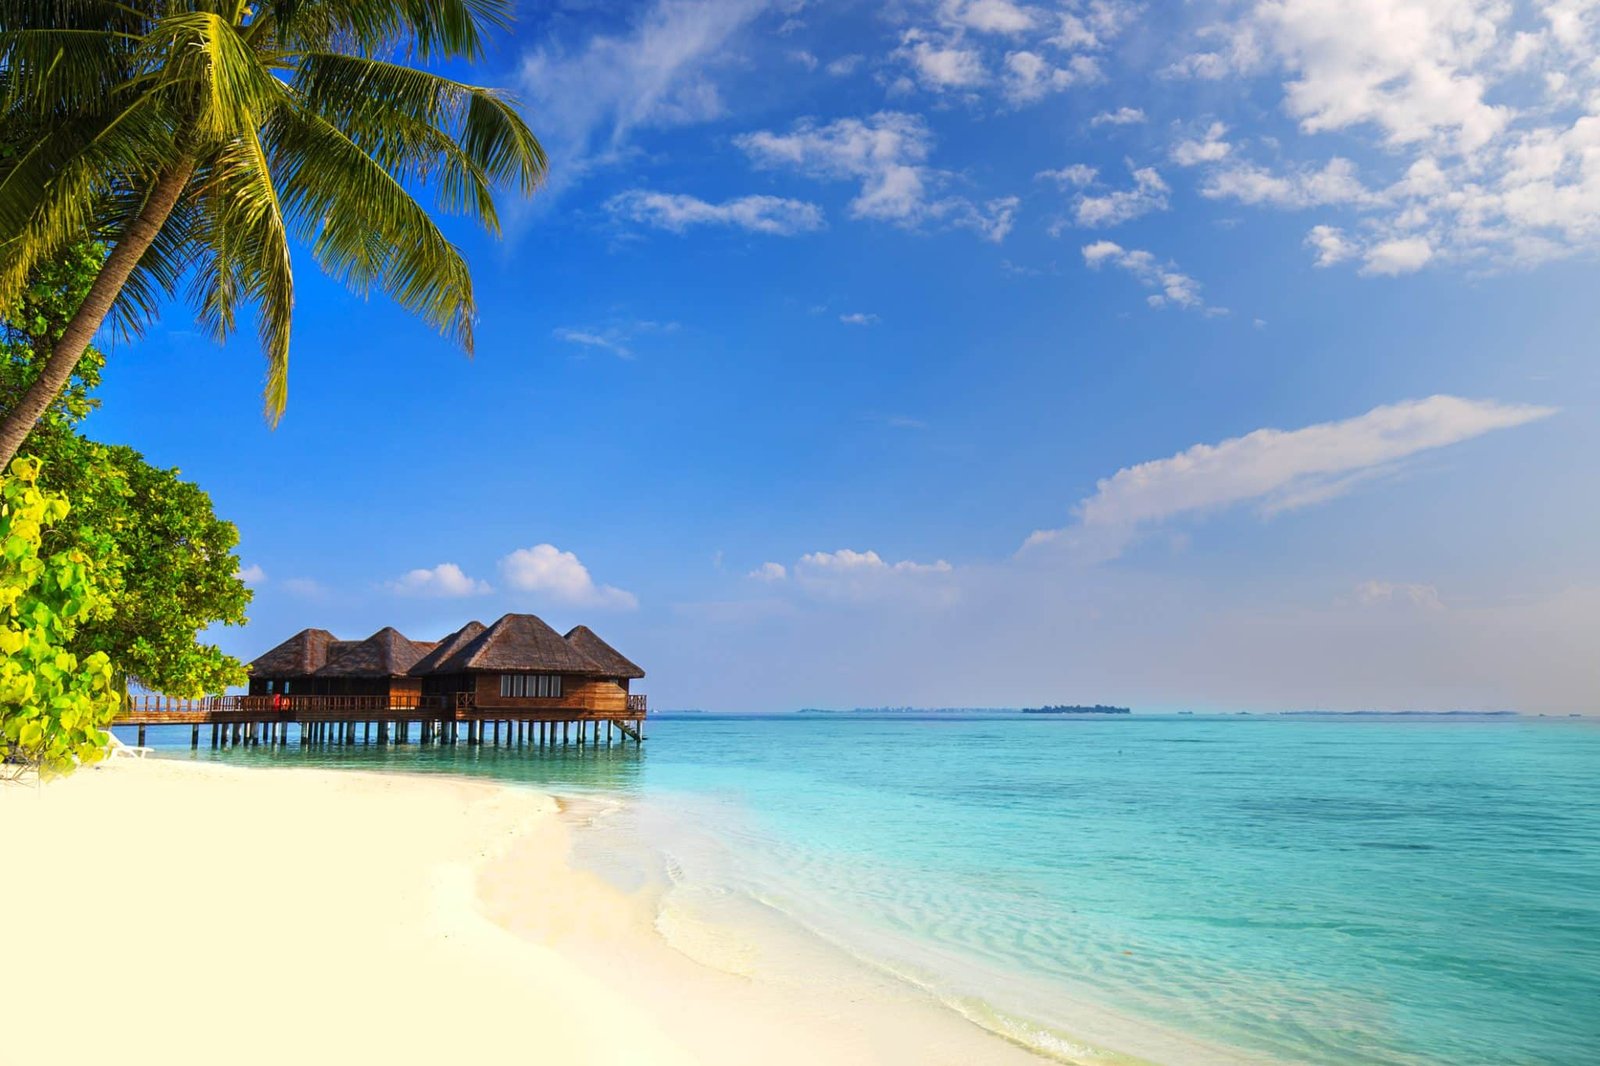 Tropical island with sandy beach, palm trees, overwater bungalows and tourquise clear water